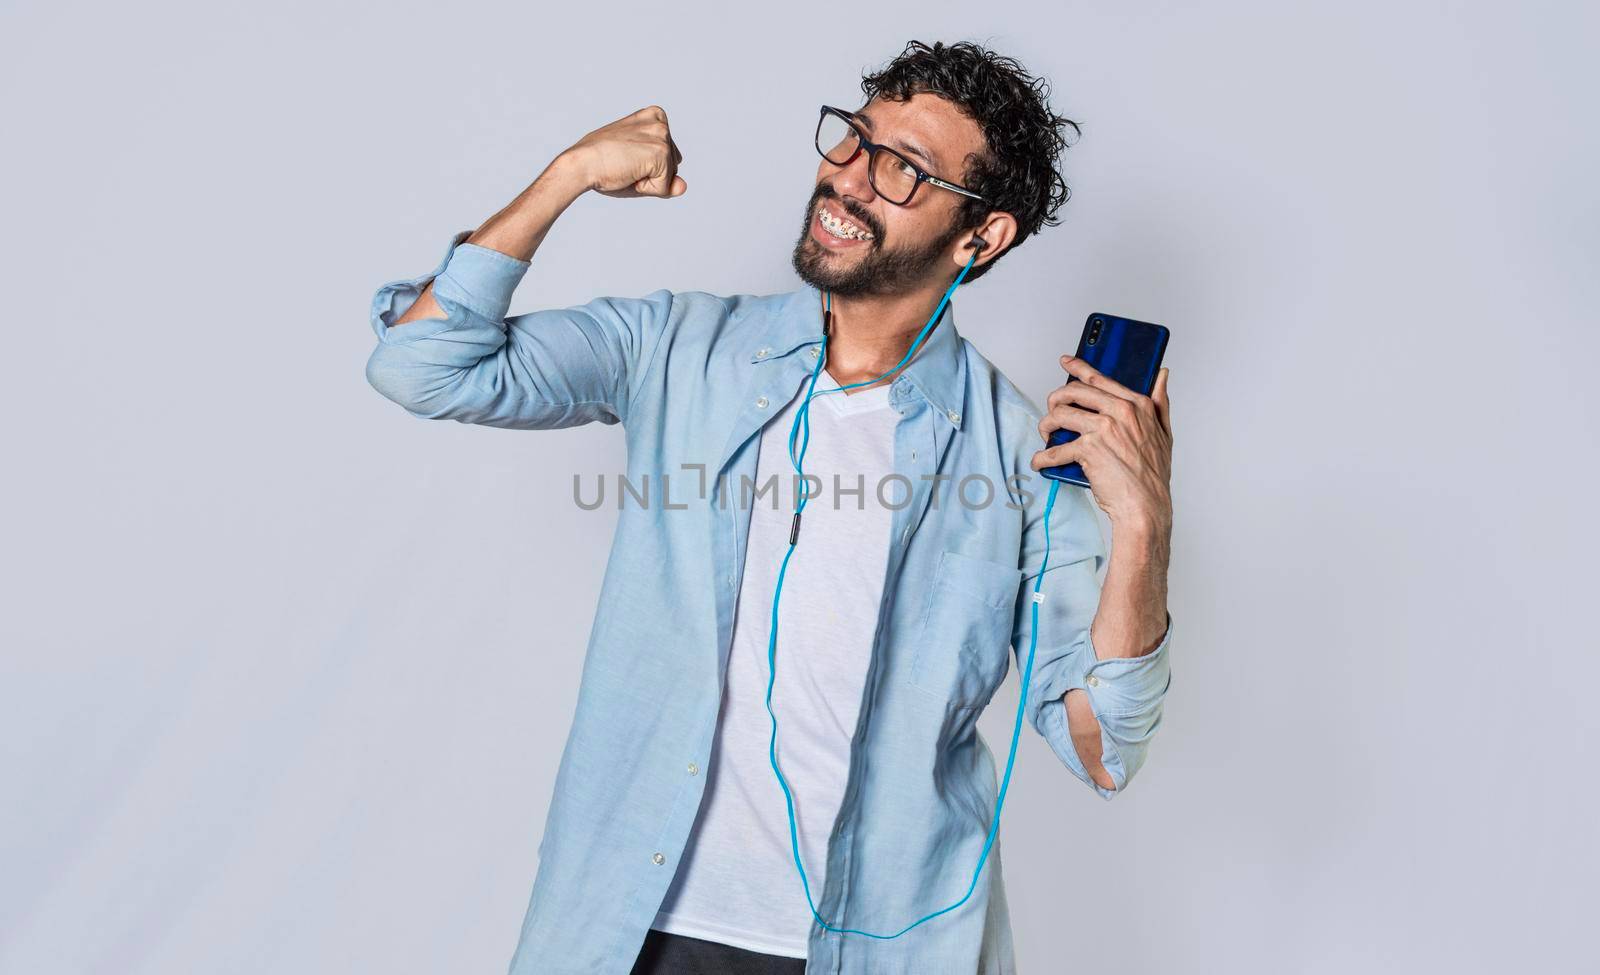 Happy man with headphones holding a cell phone and celebrates, A guy with his smartphone celebrating victory by isaiphoto